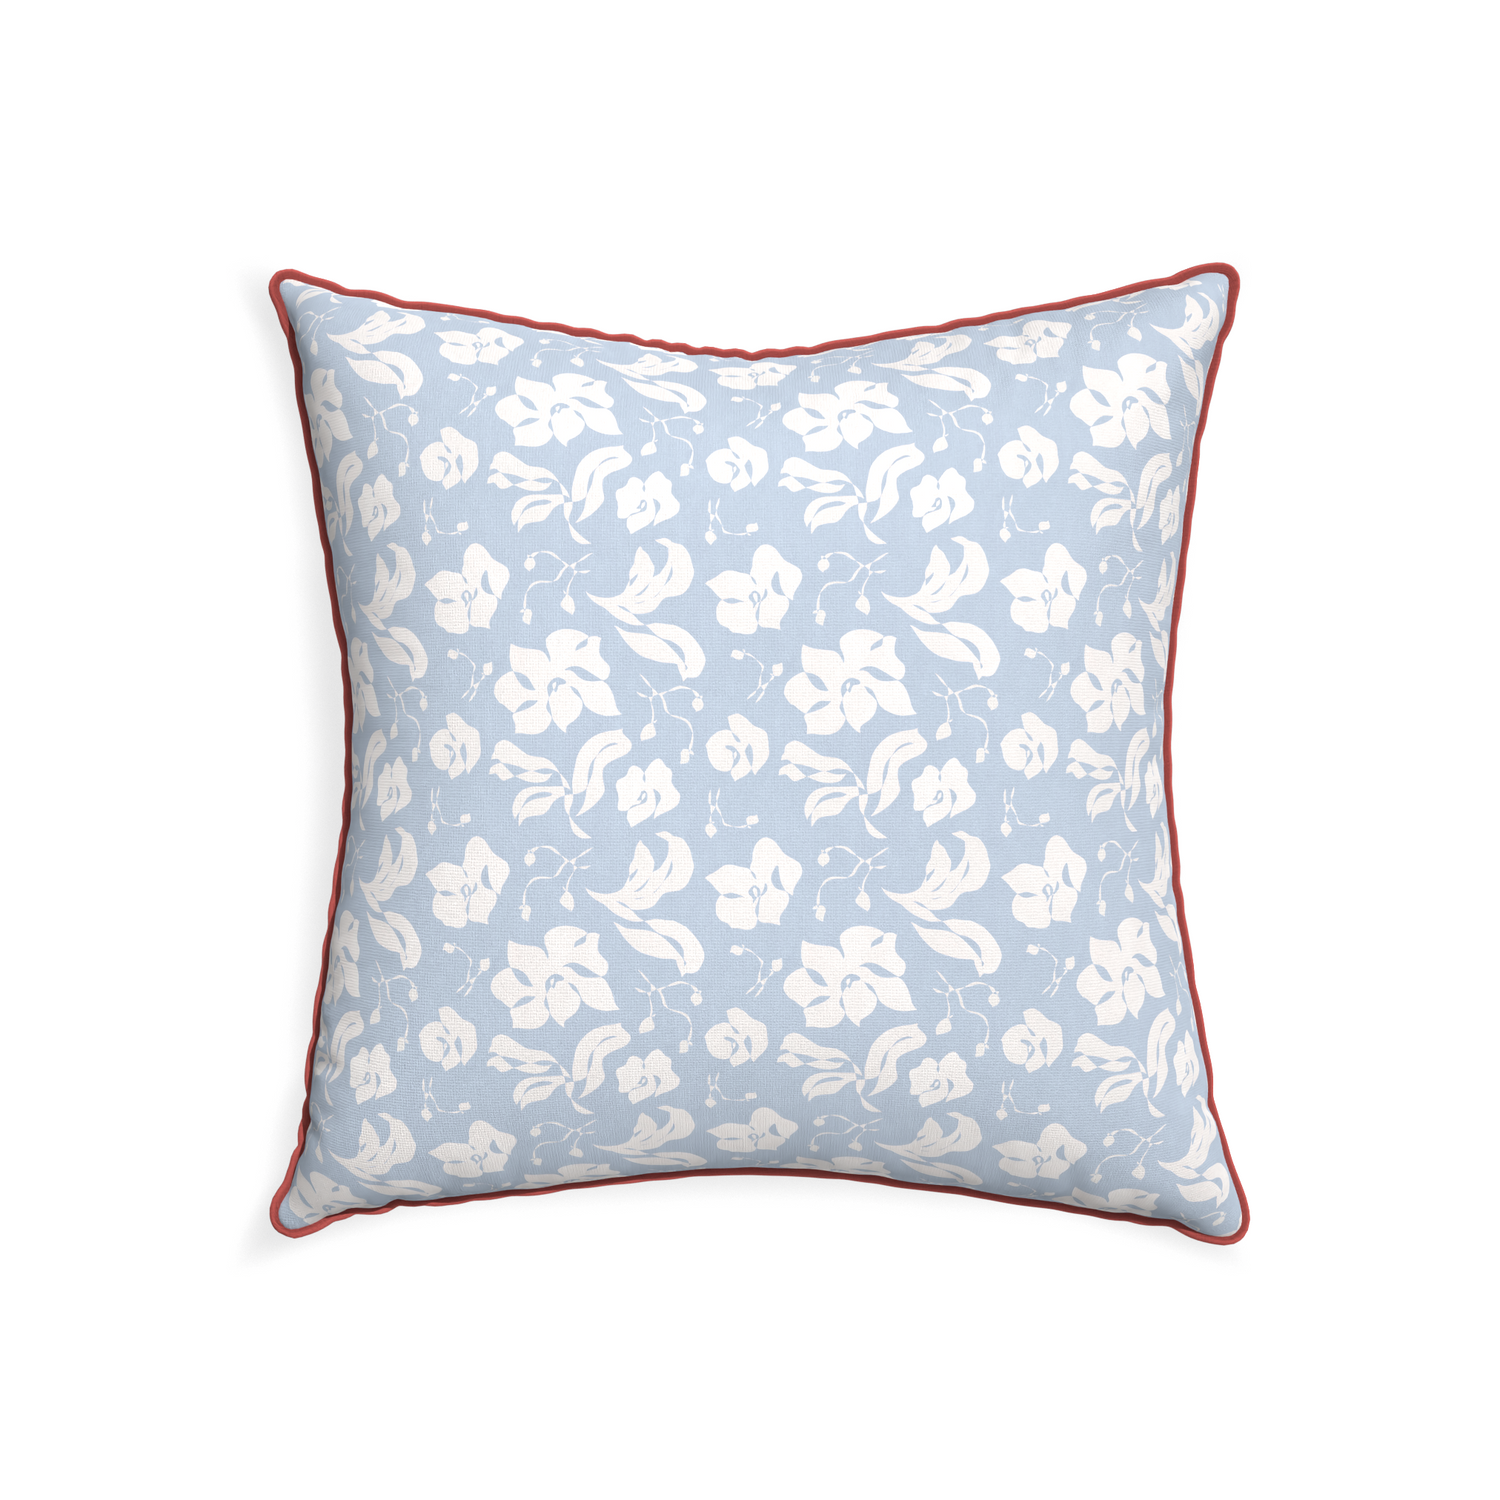 22-square georgia custom cornflower blue floralpillow with c piping on white background